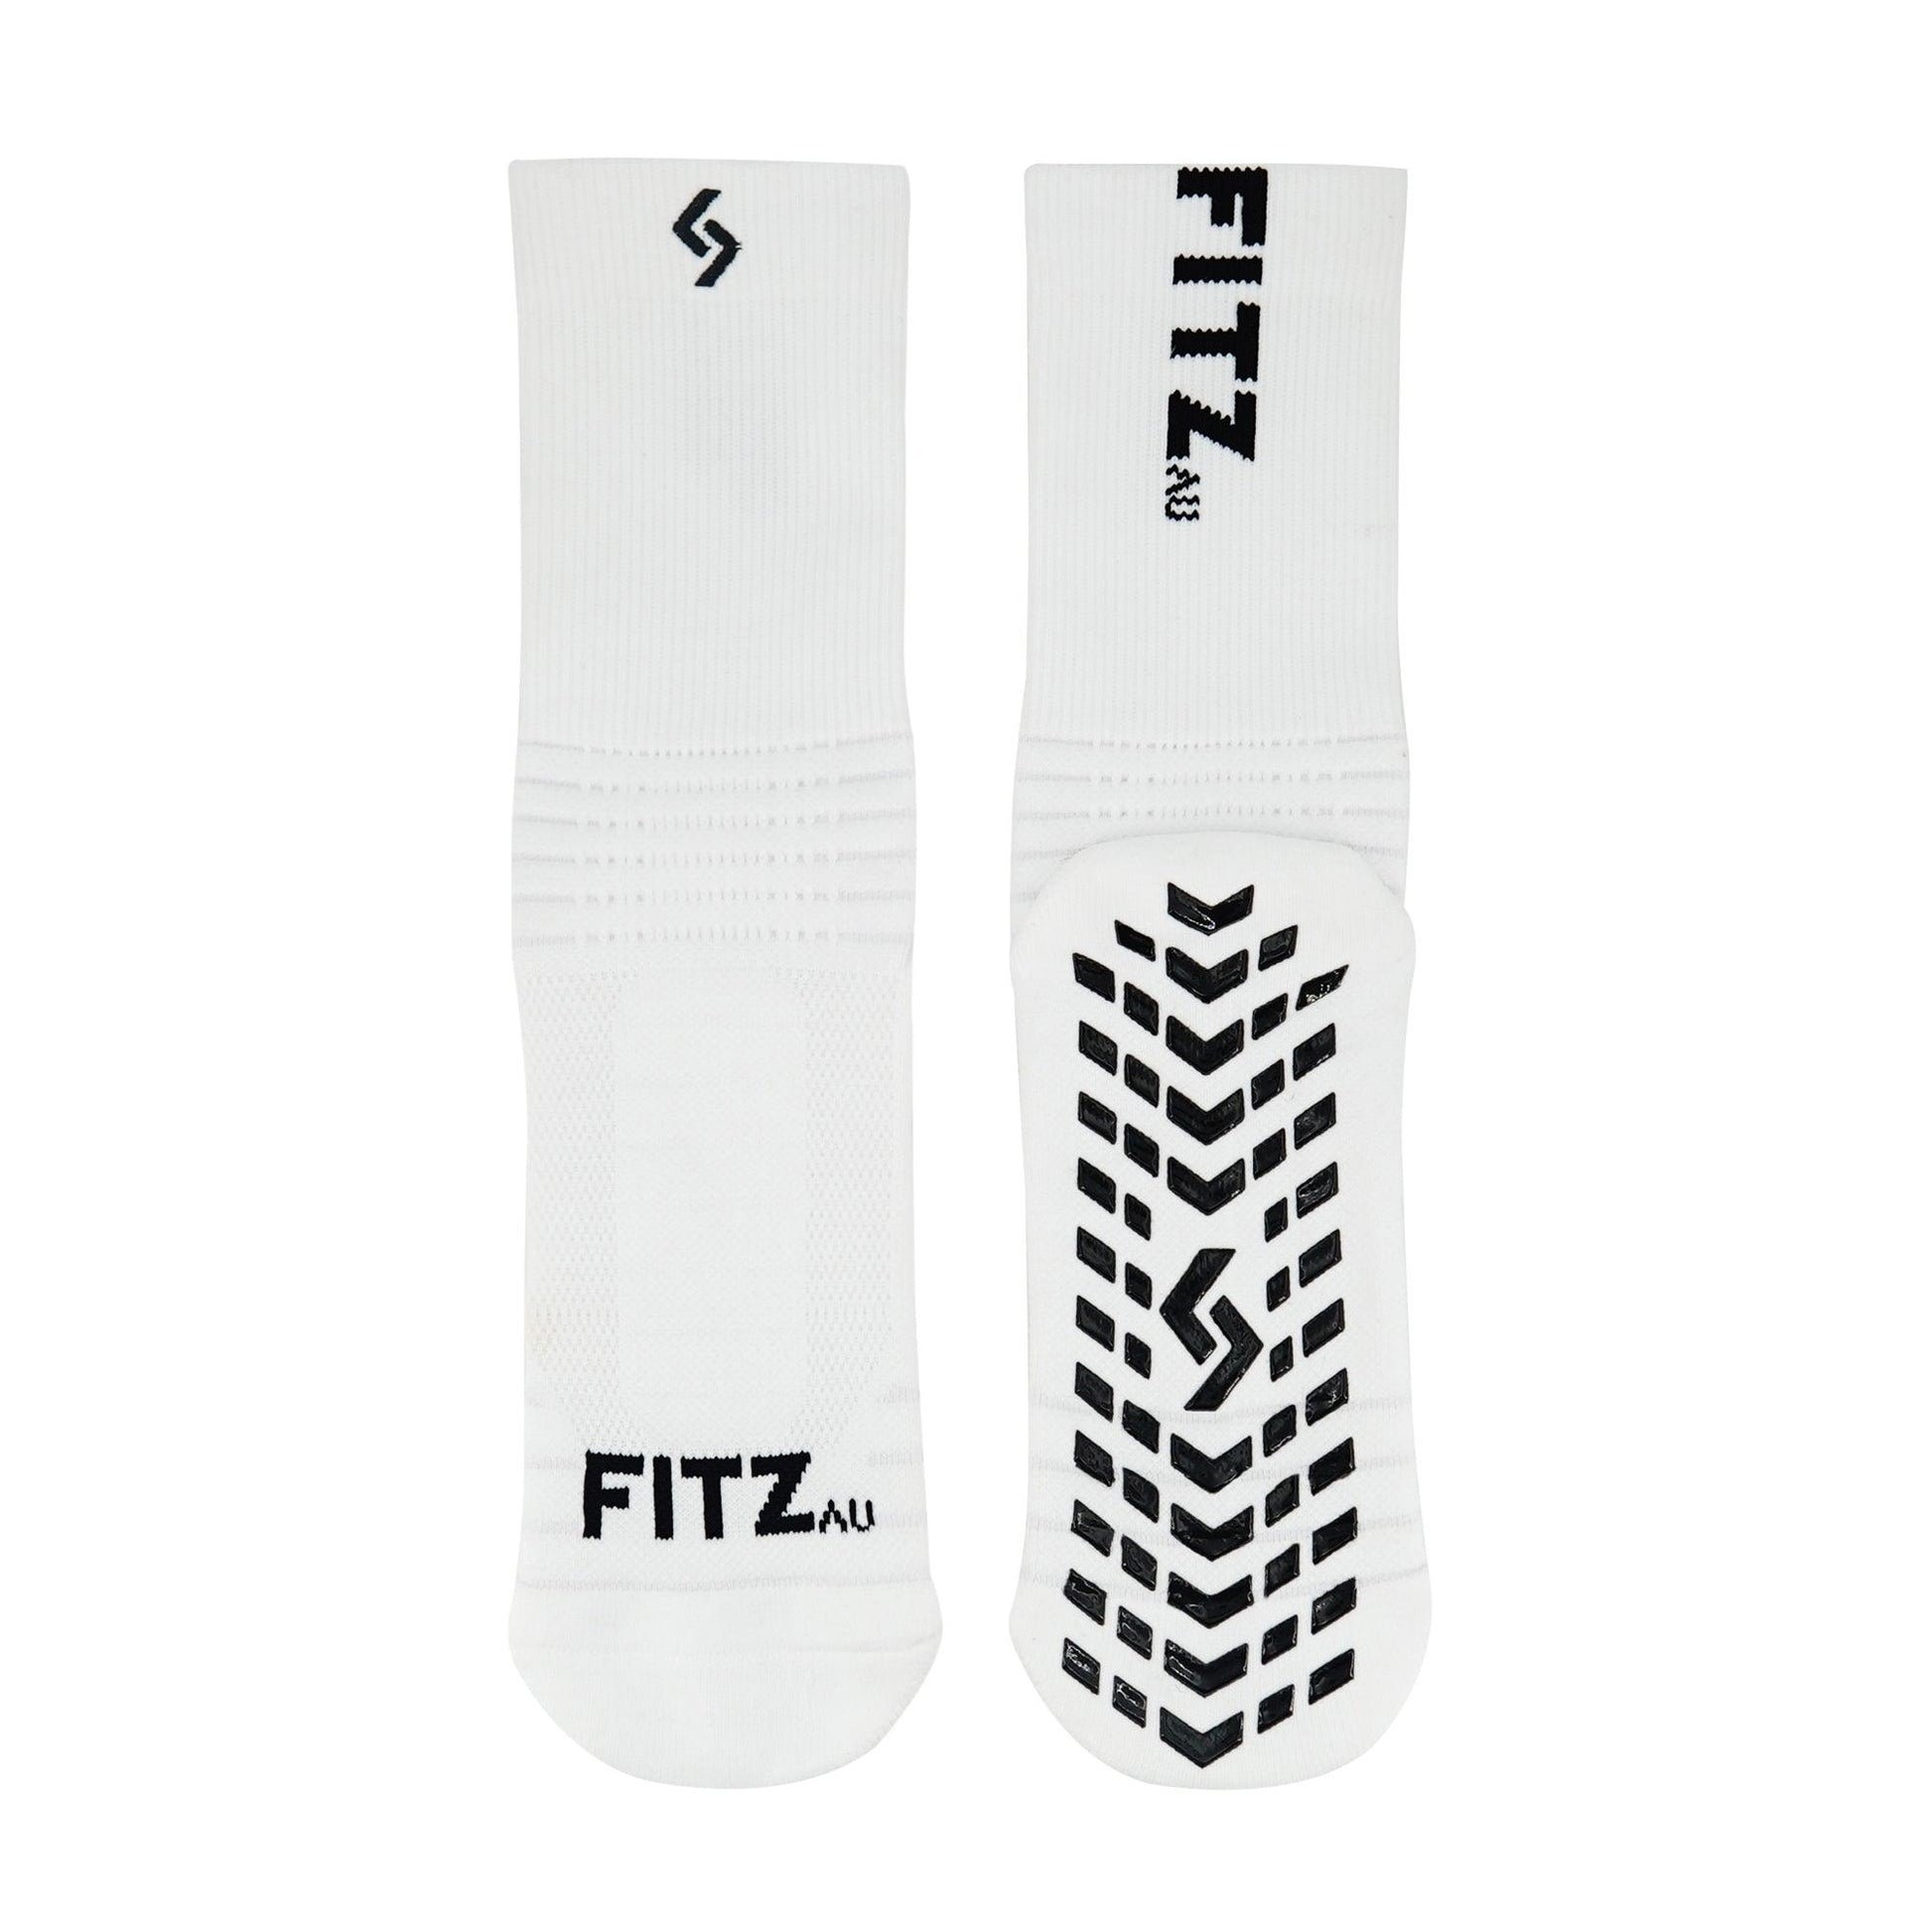 Stepzz - Our 3 and 5 pack of Stepzz Grip Socks are up to